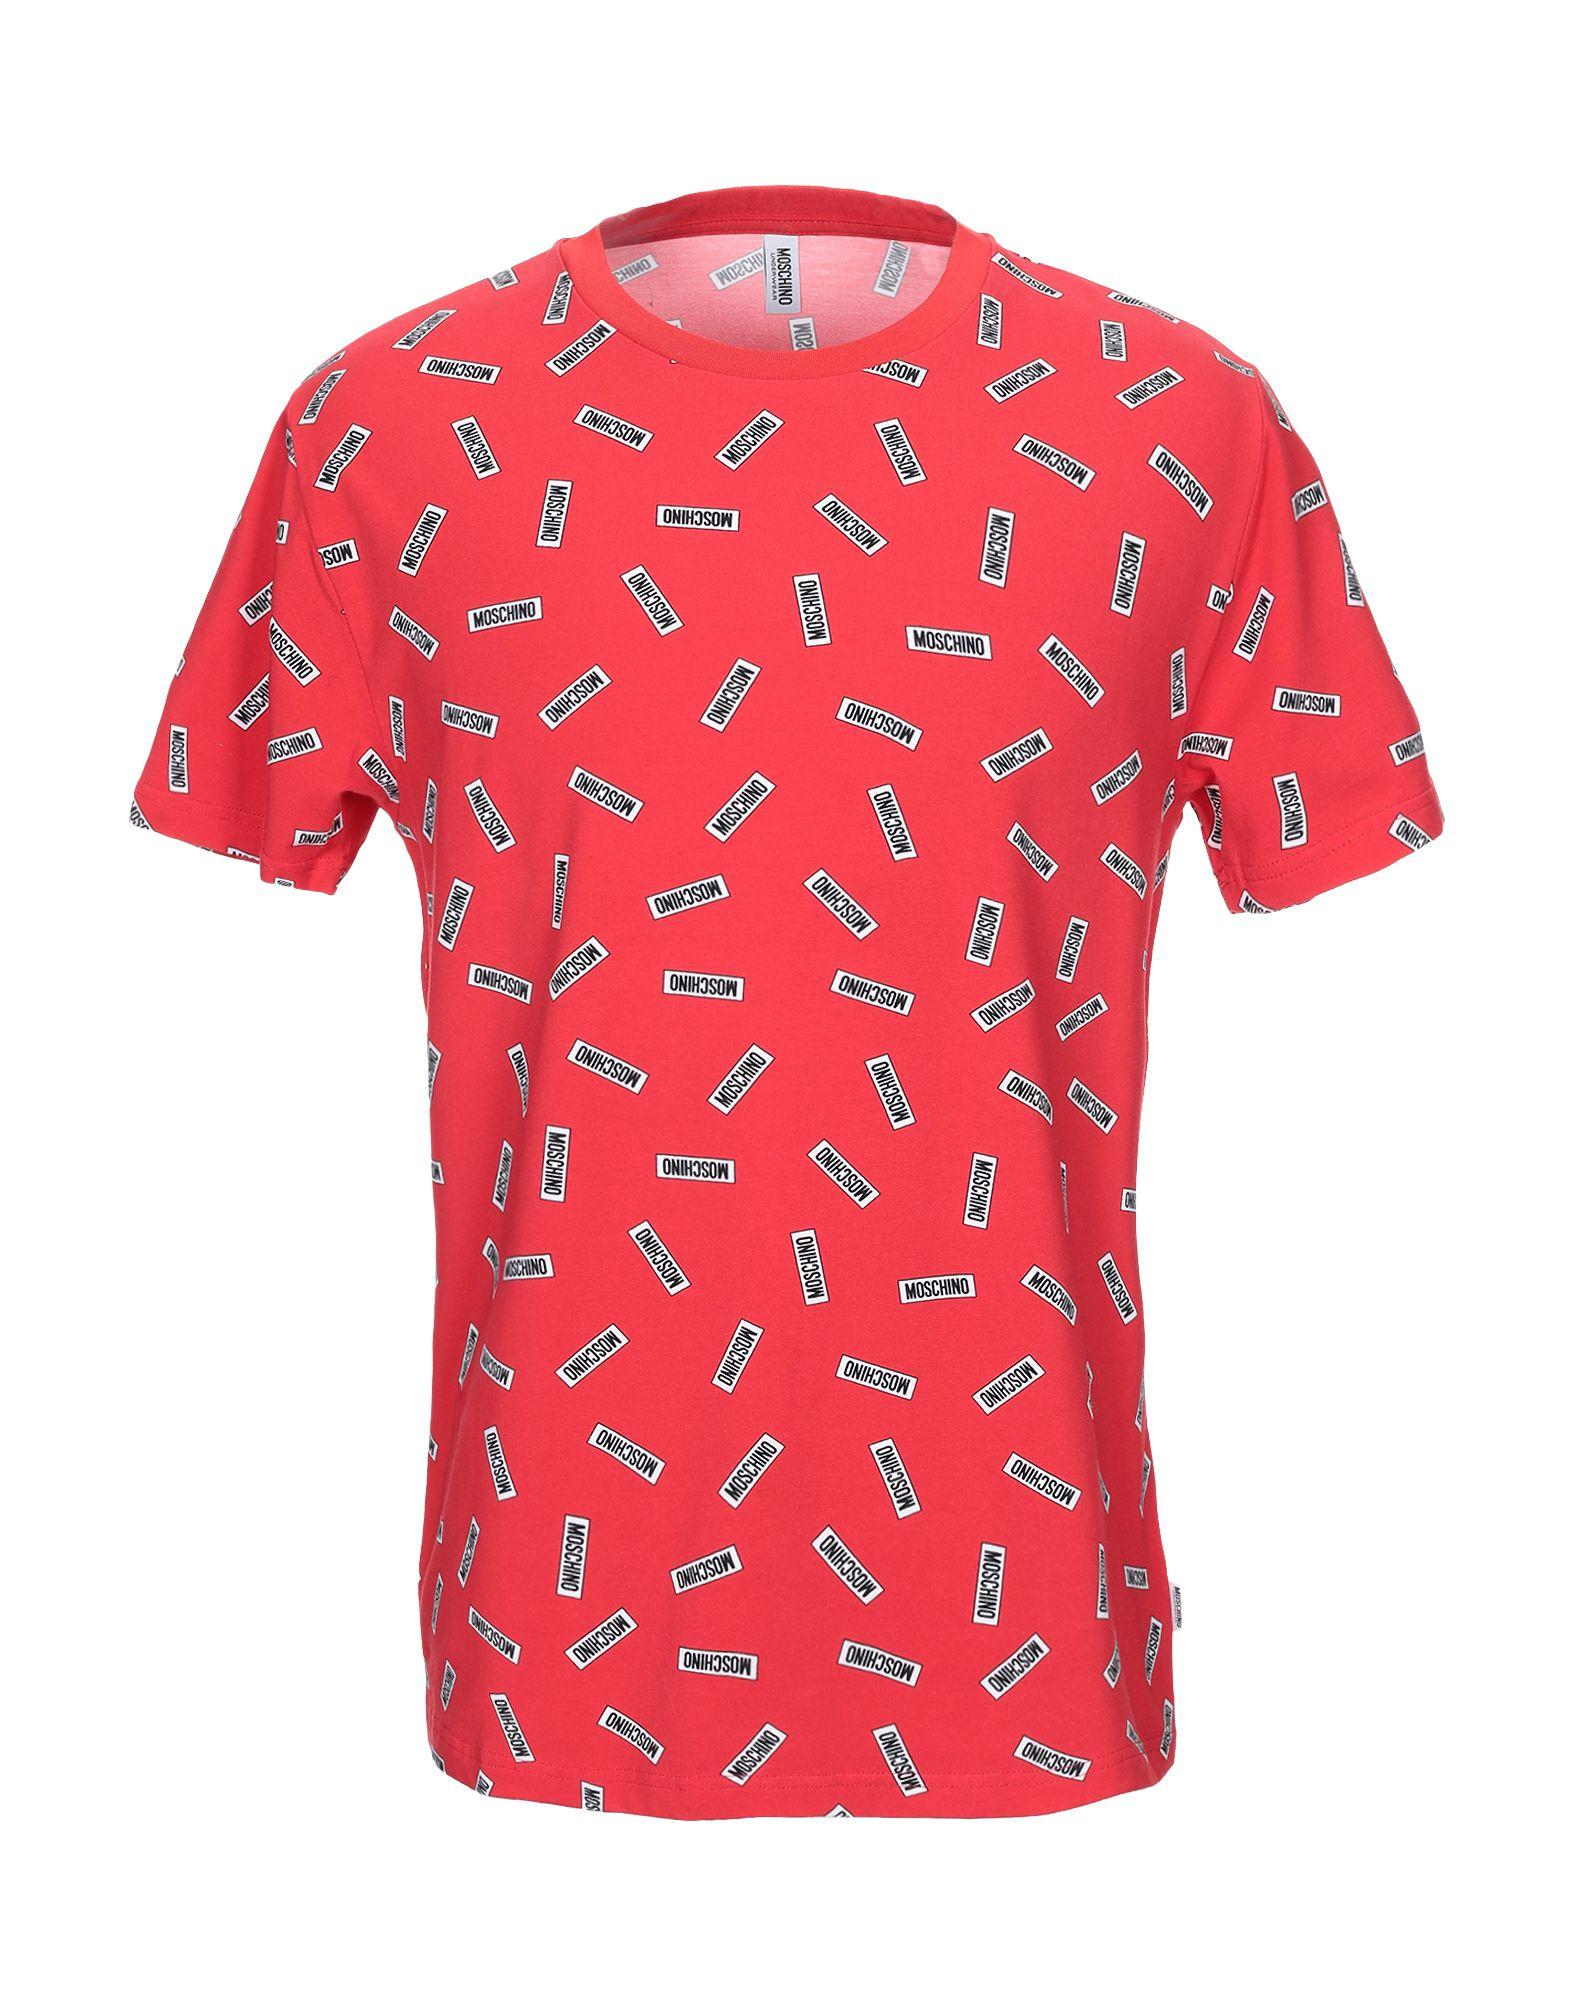 Moschino Cotton Undershirt in Red for Men - Lyst